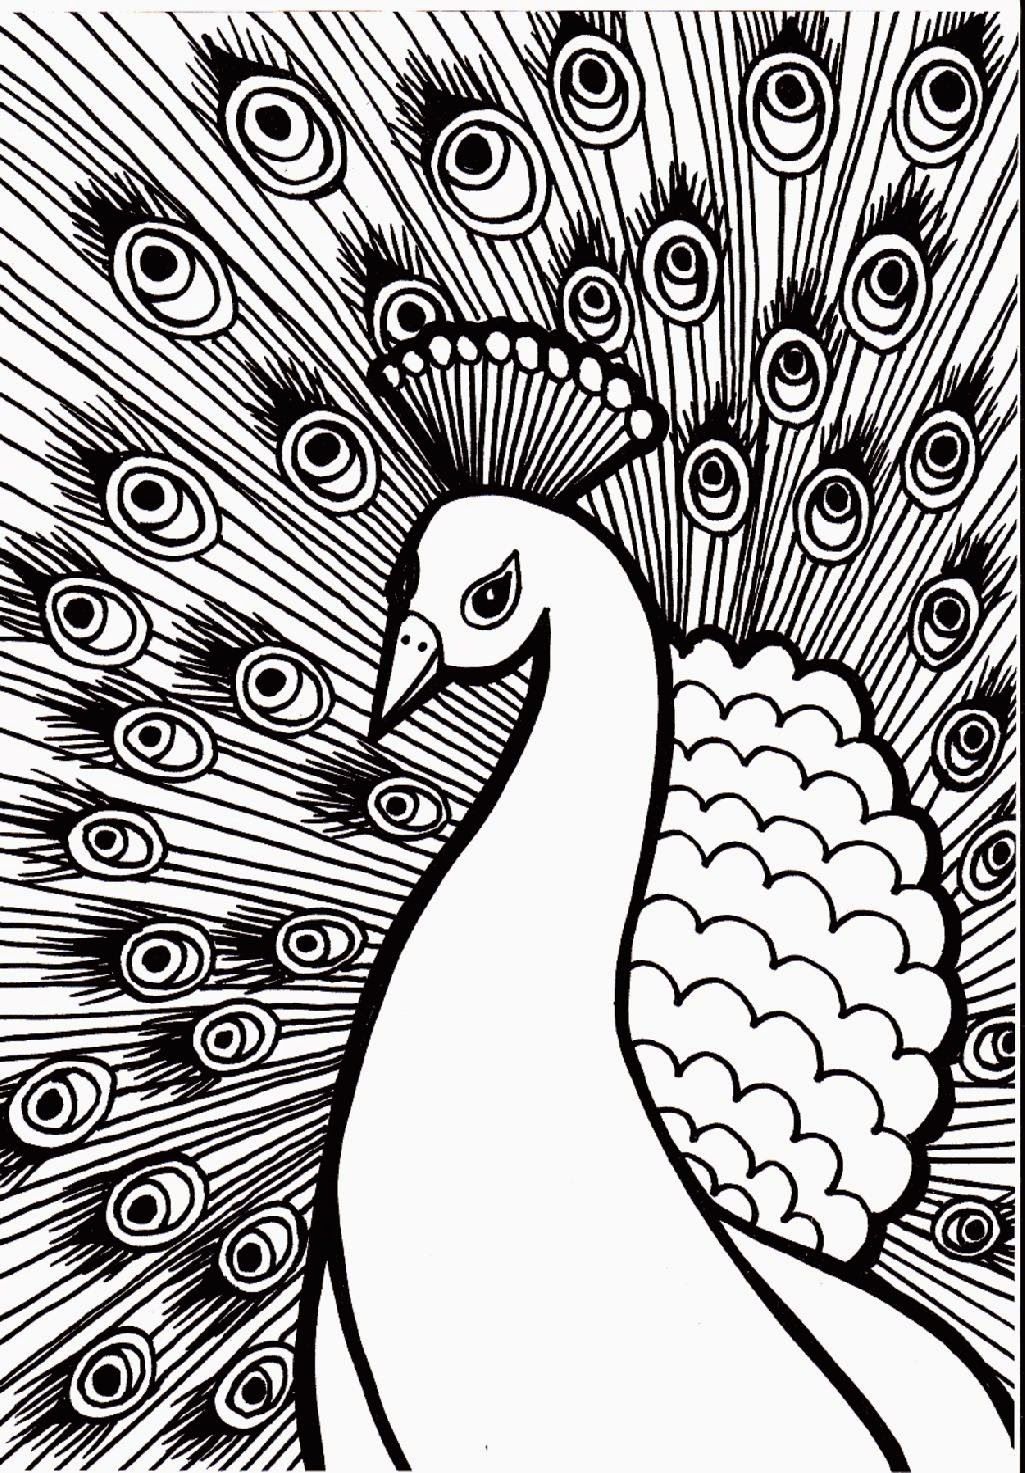 Paisley Print Coloring Pages - Coloring Home